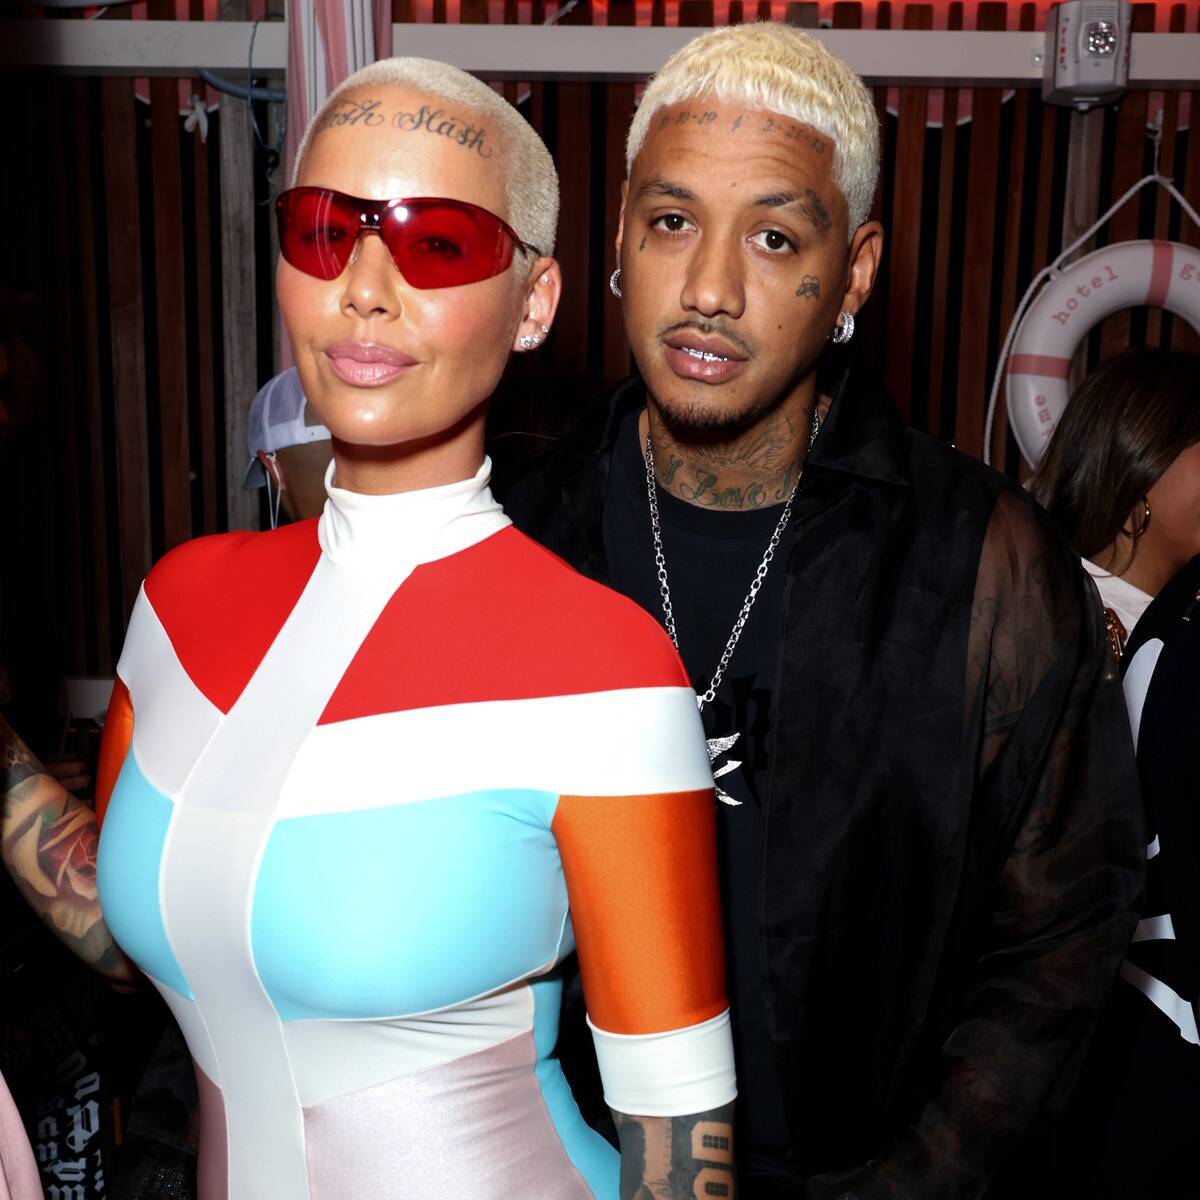 amber-rose-says-alexander-edwards-cheated-on-her-with-12-women